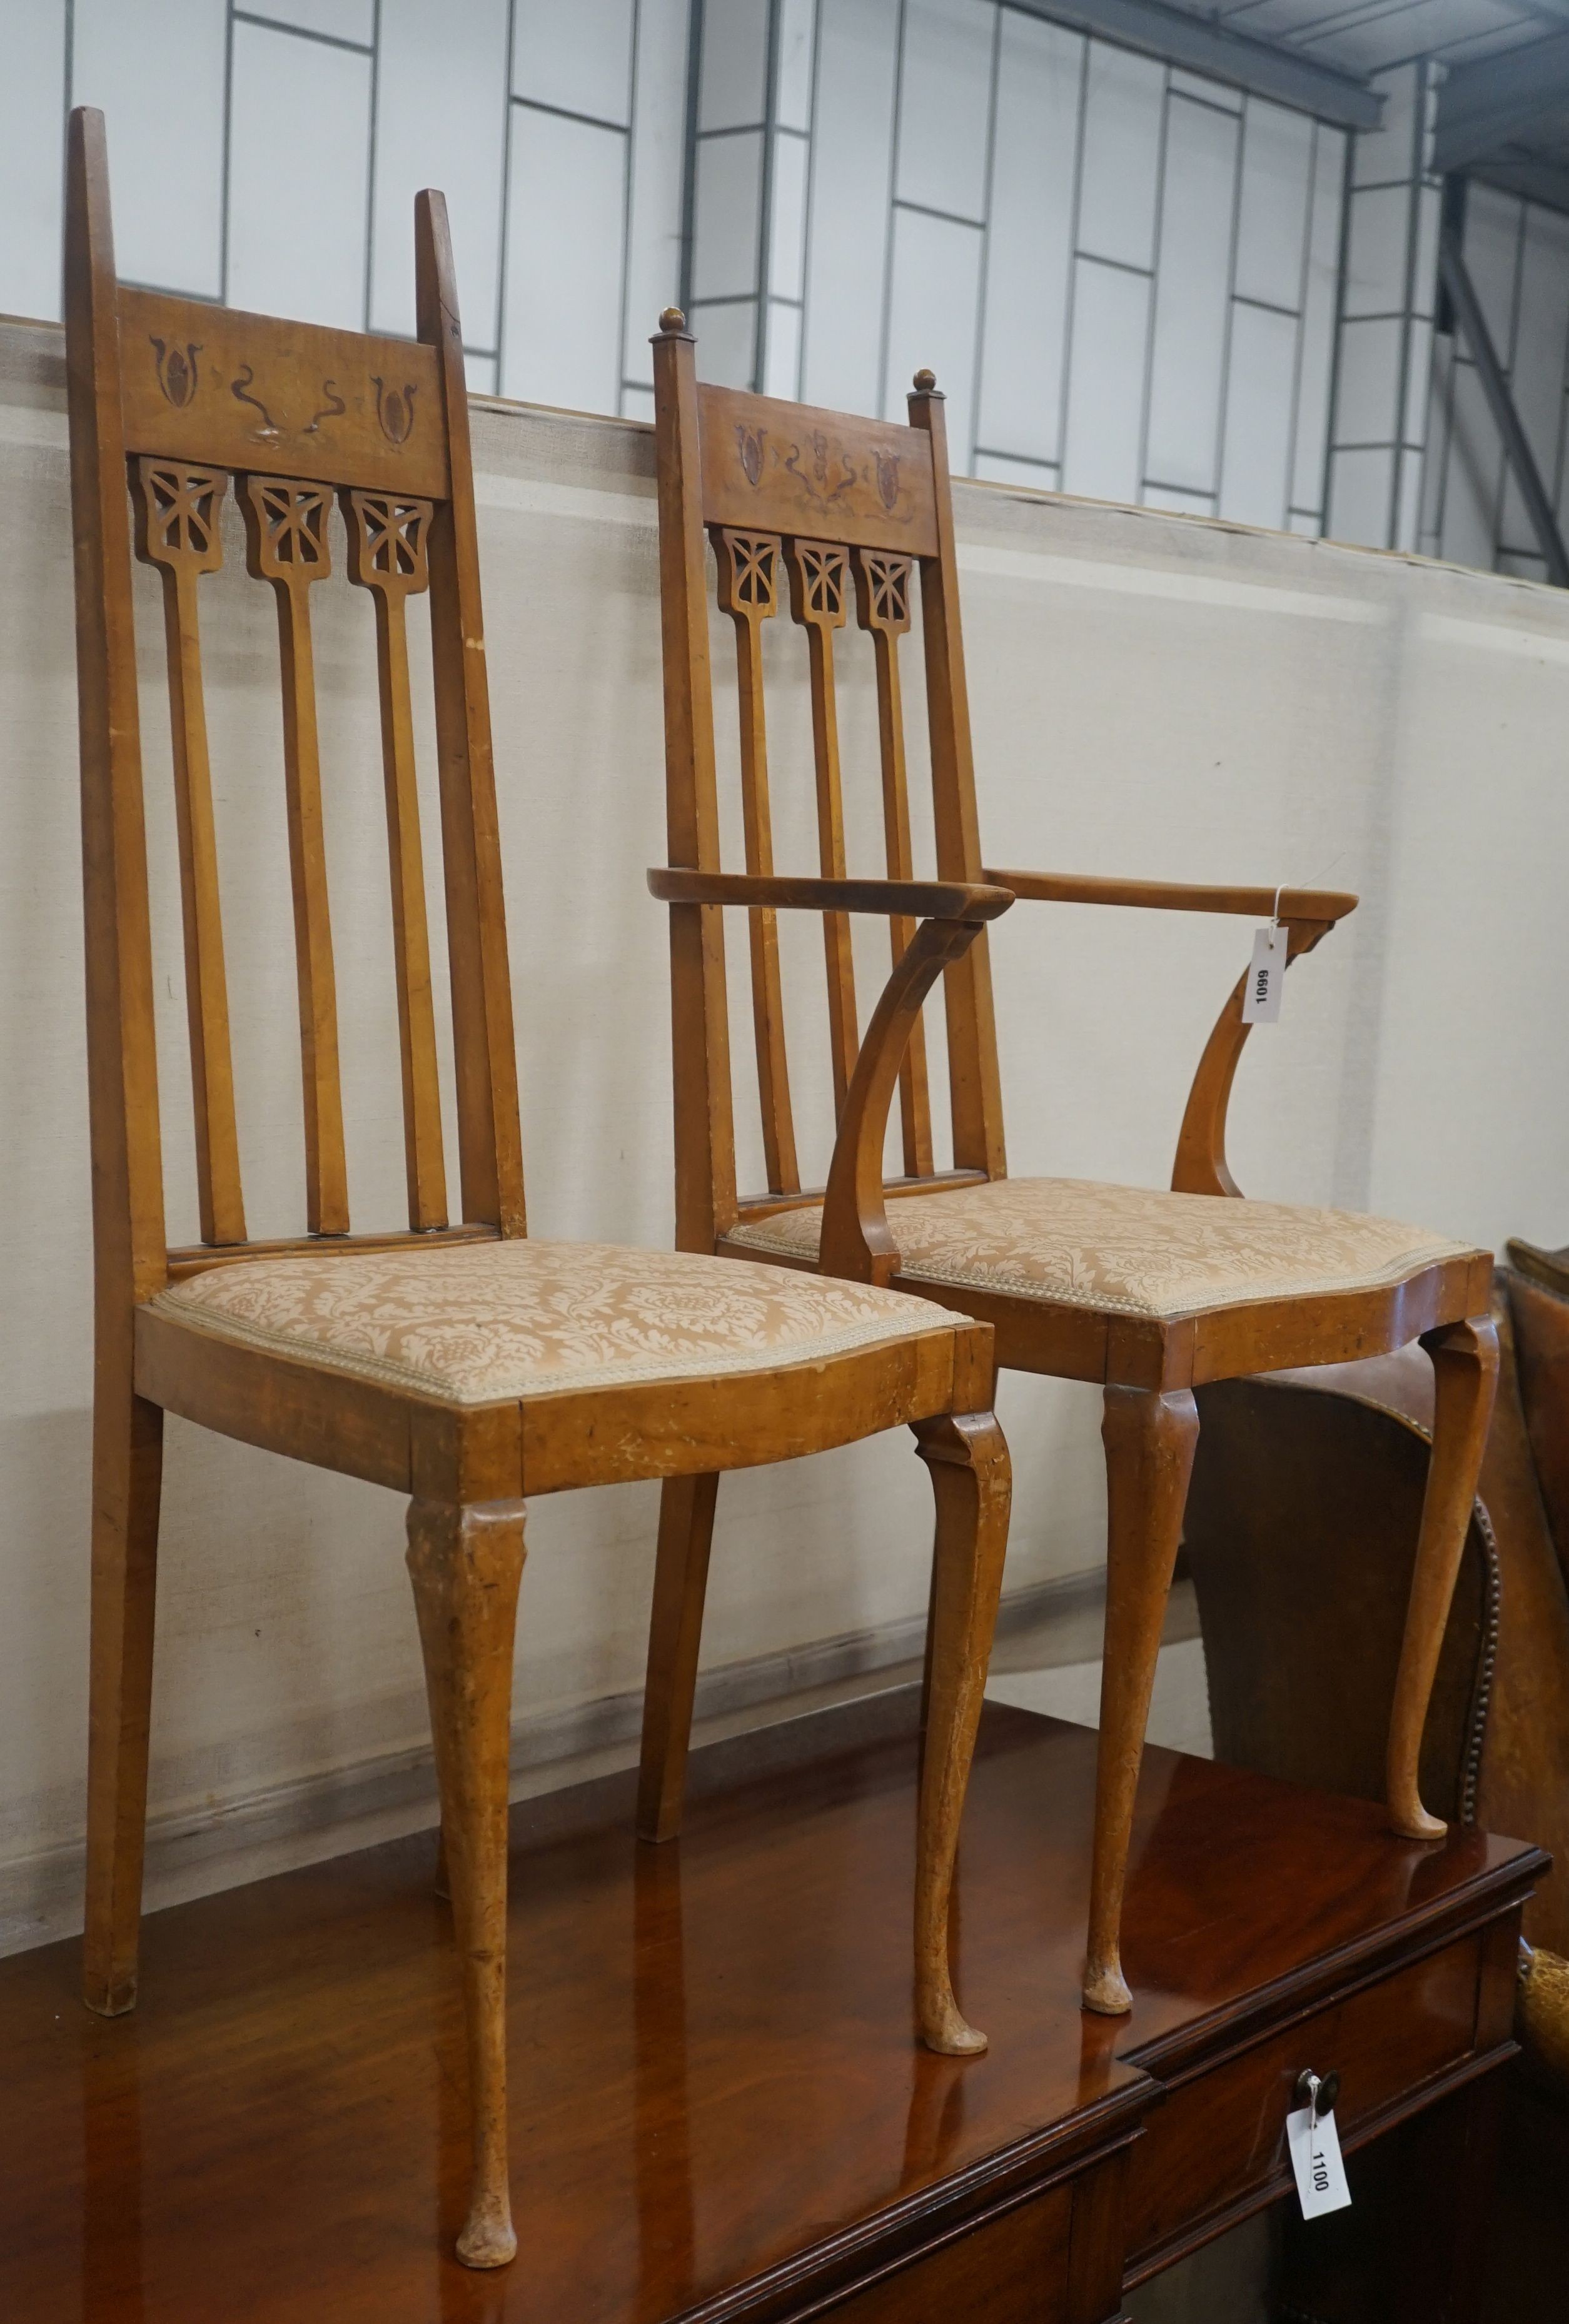 A pair of Art Nouveau inlaid mahogany chairs, one with arms